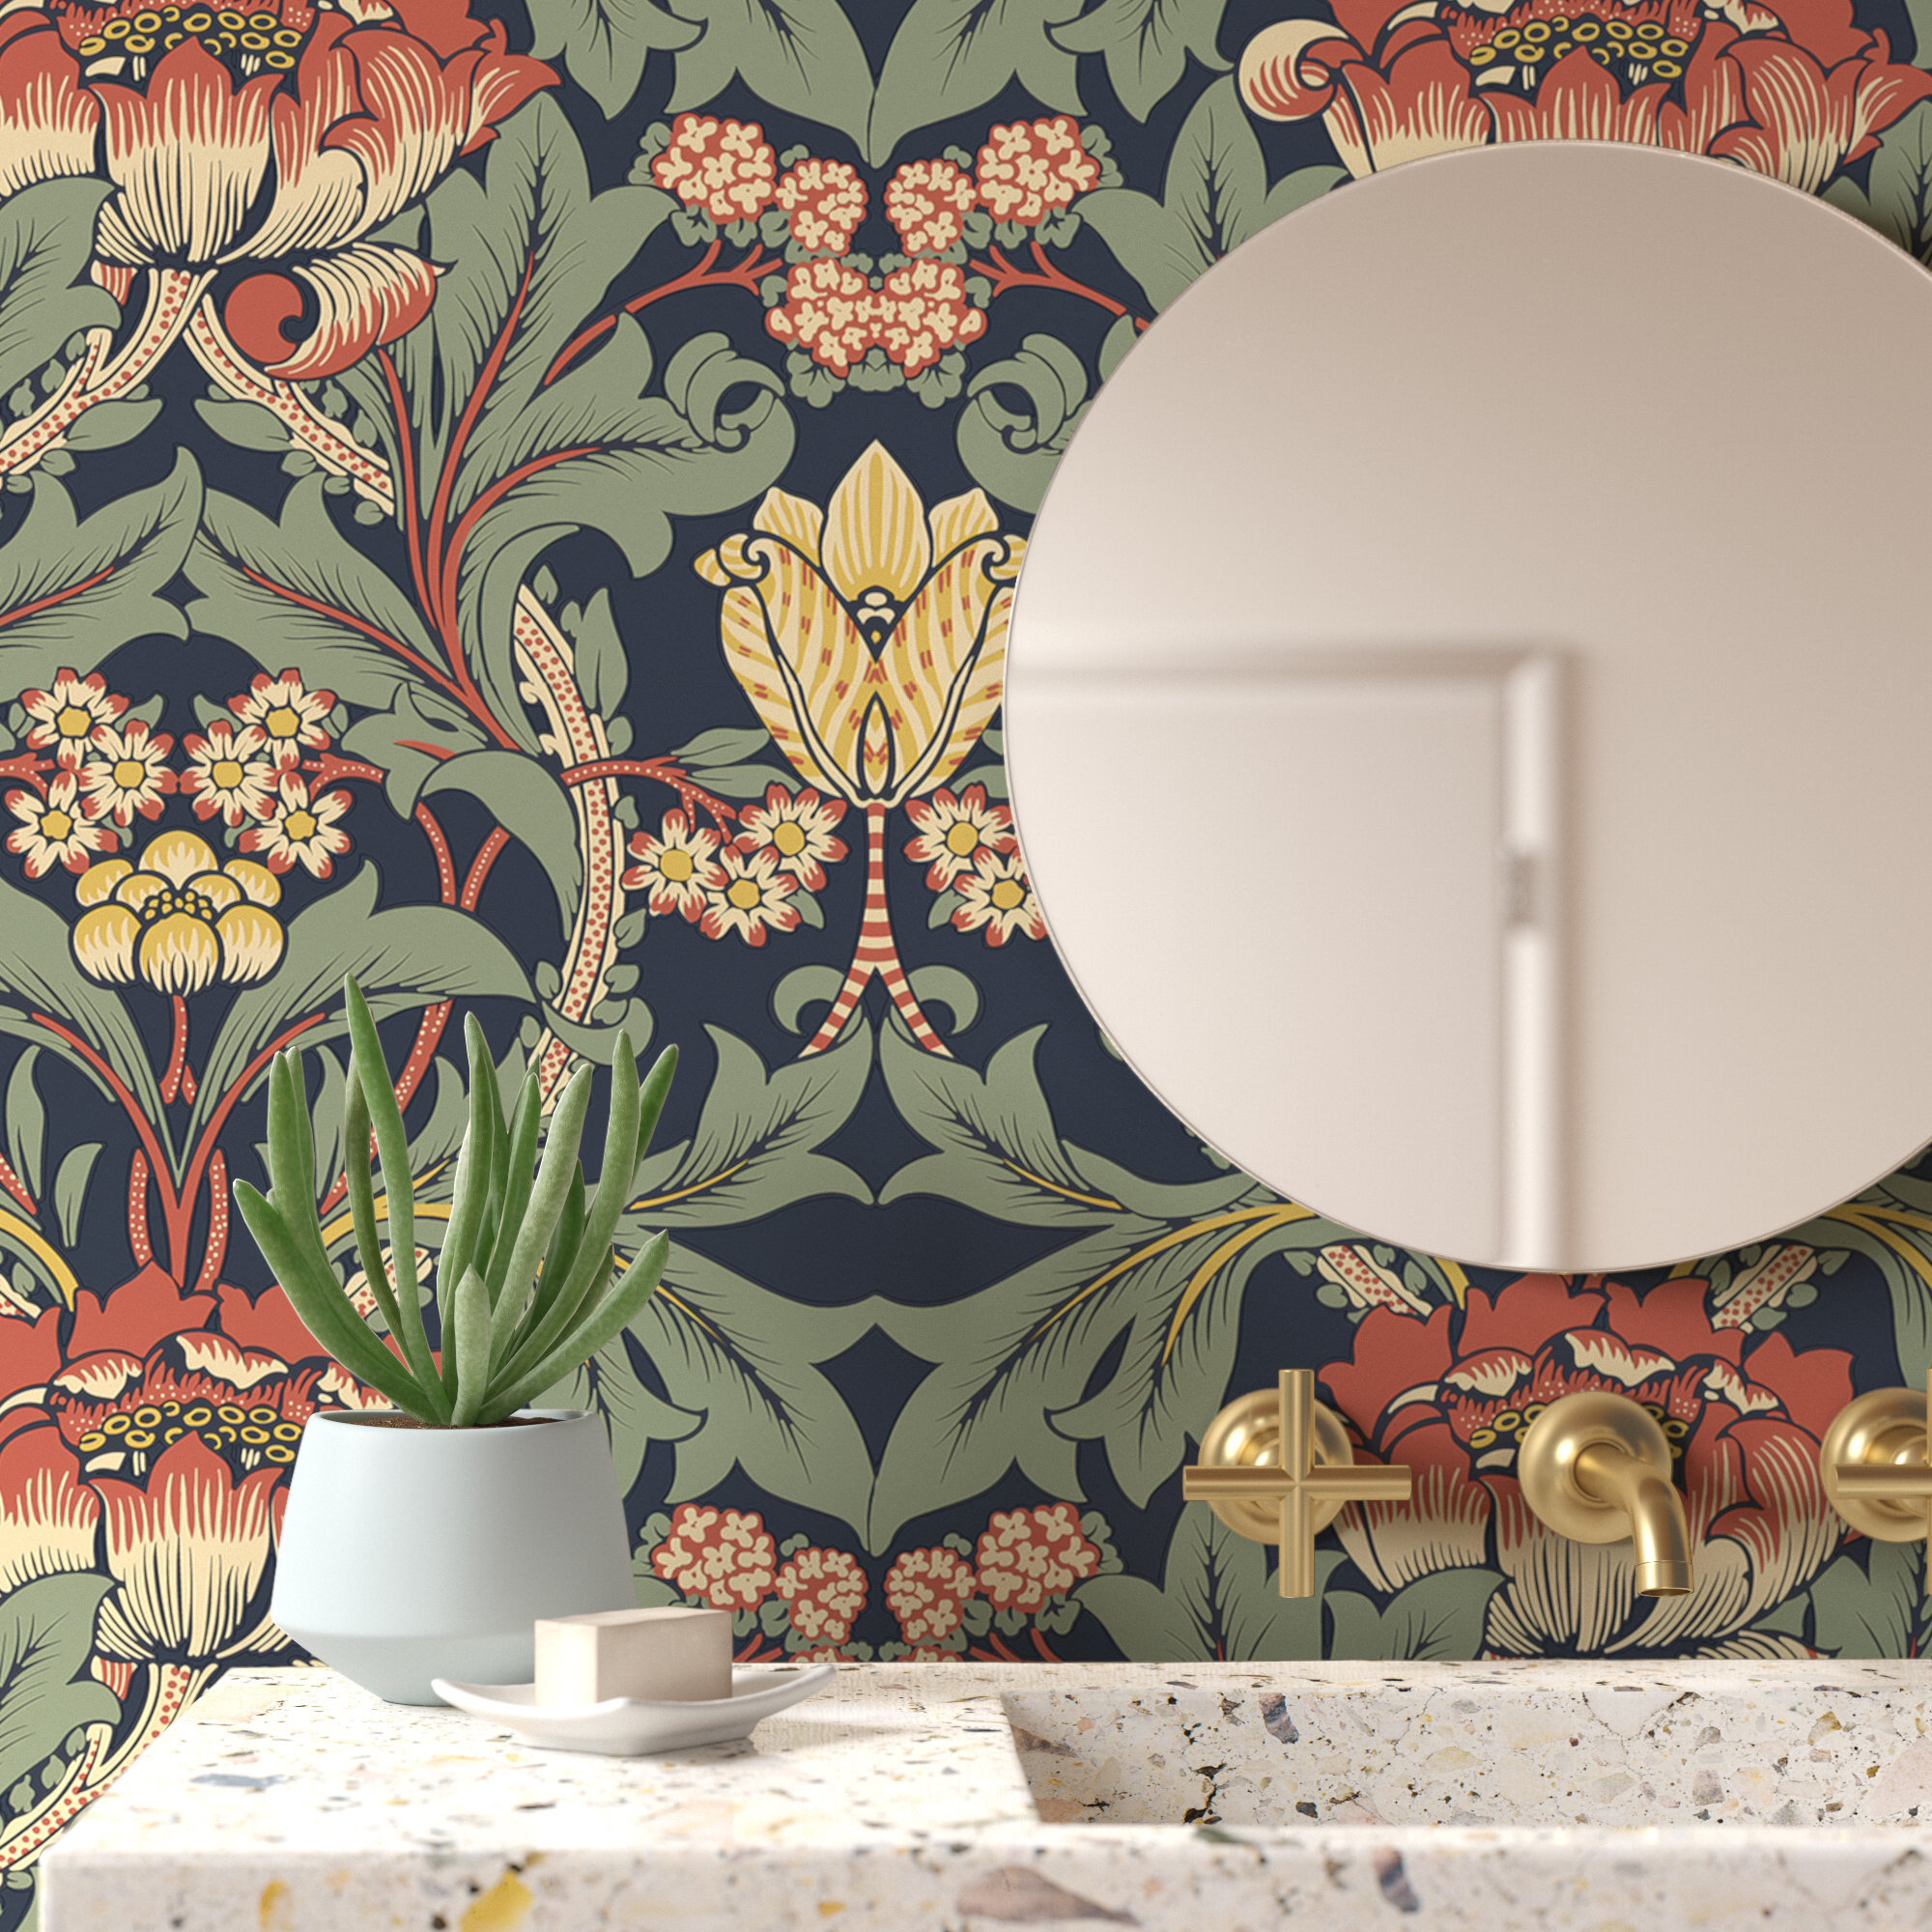 Flower Patch Peel And Stick Removable Wallpaper